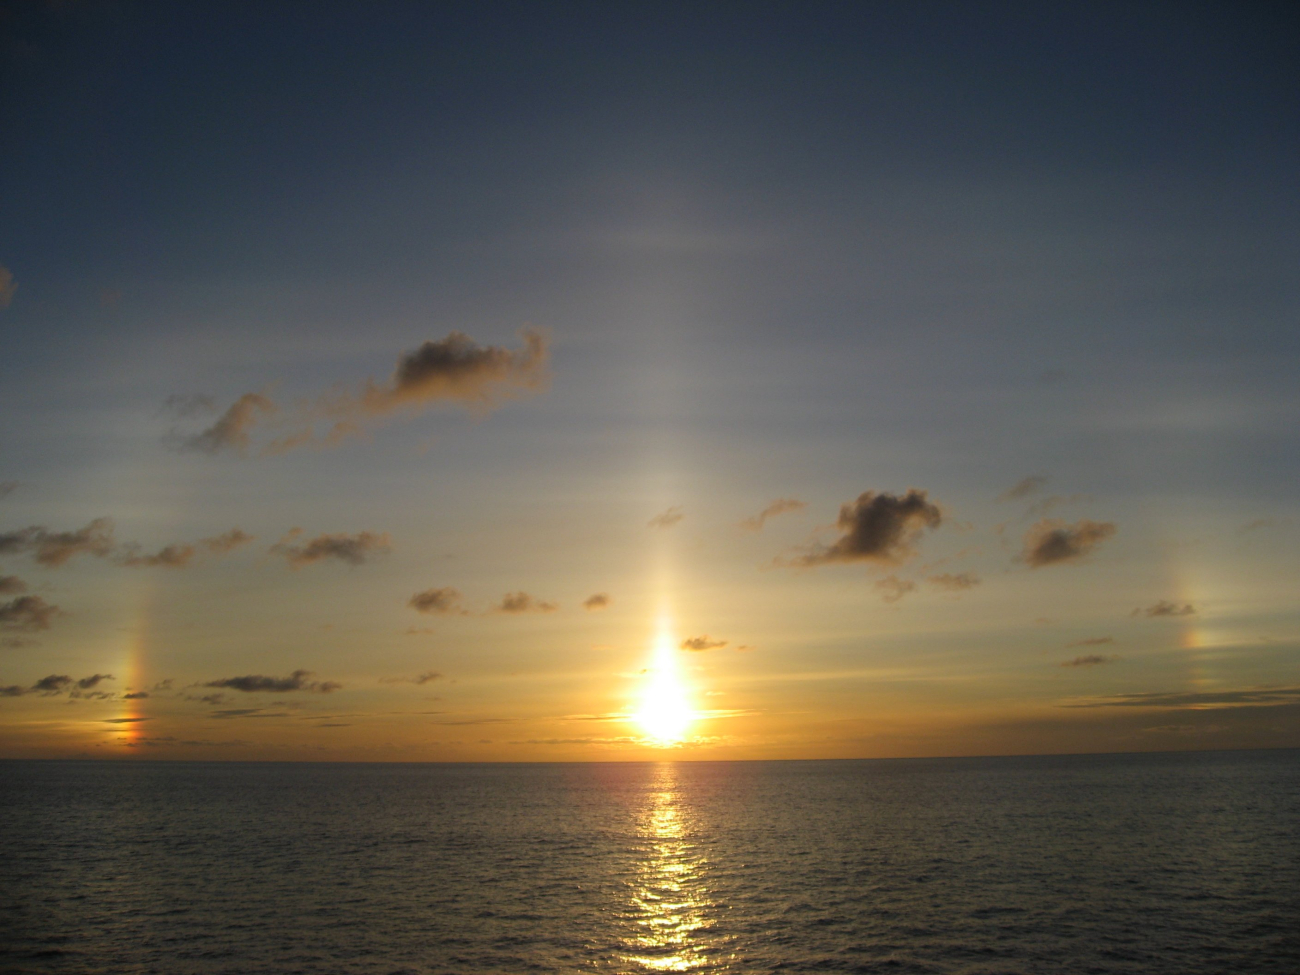 Sunset at sea with sun dogs on each side of the setting sun